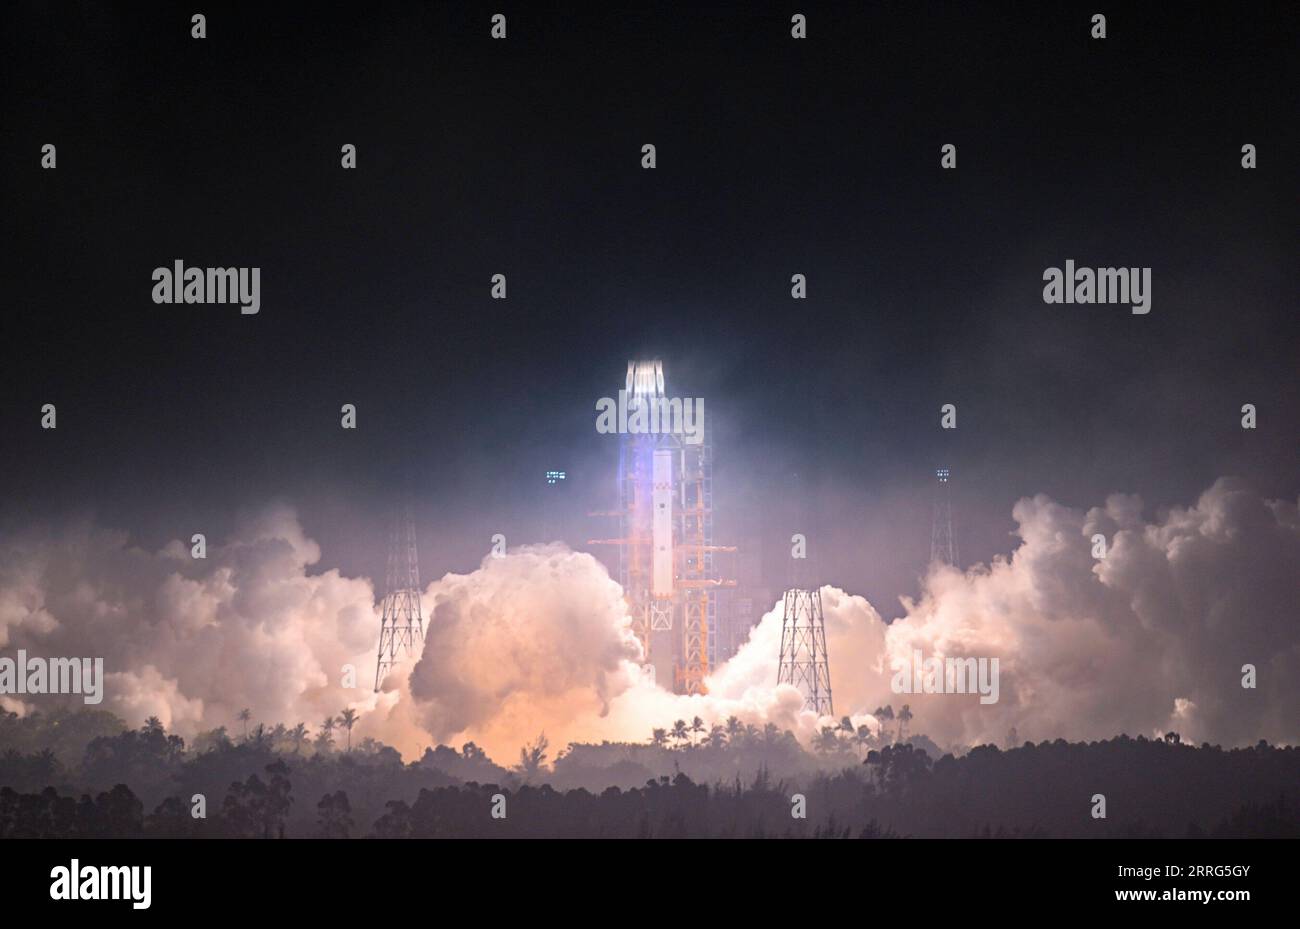 220510 -- WENCHANG, May 10, 2022 -- The Long March-7 Y5 rocket, carrying Tianzhou-4, blasts off from the Wenchang Spacecraft Launch Site in south China s Hainan Province, May 10, 2022. China launched cargo spacecraft Tianzhou-4 on Tuesday to deliver supplies for its space station which is scheduled to wrap up construction this year.  EyesonSciCHINA-HAINAN-TIANZHOU-4-CARGO SPACECRAFT-LAUNCH CN GuoxCheng PUBLICATIONxNOTxINxCHN Stock Photo